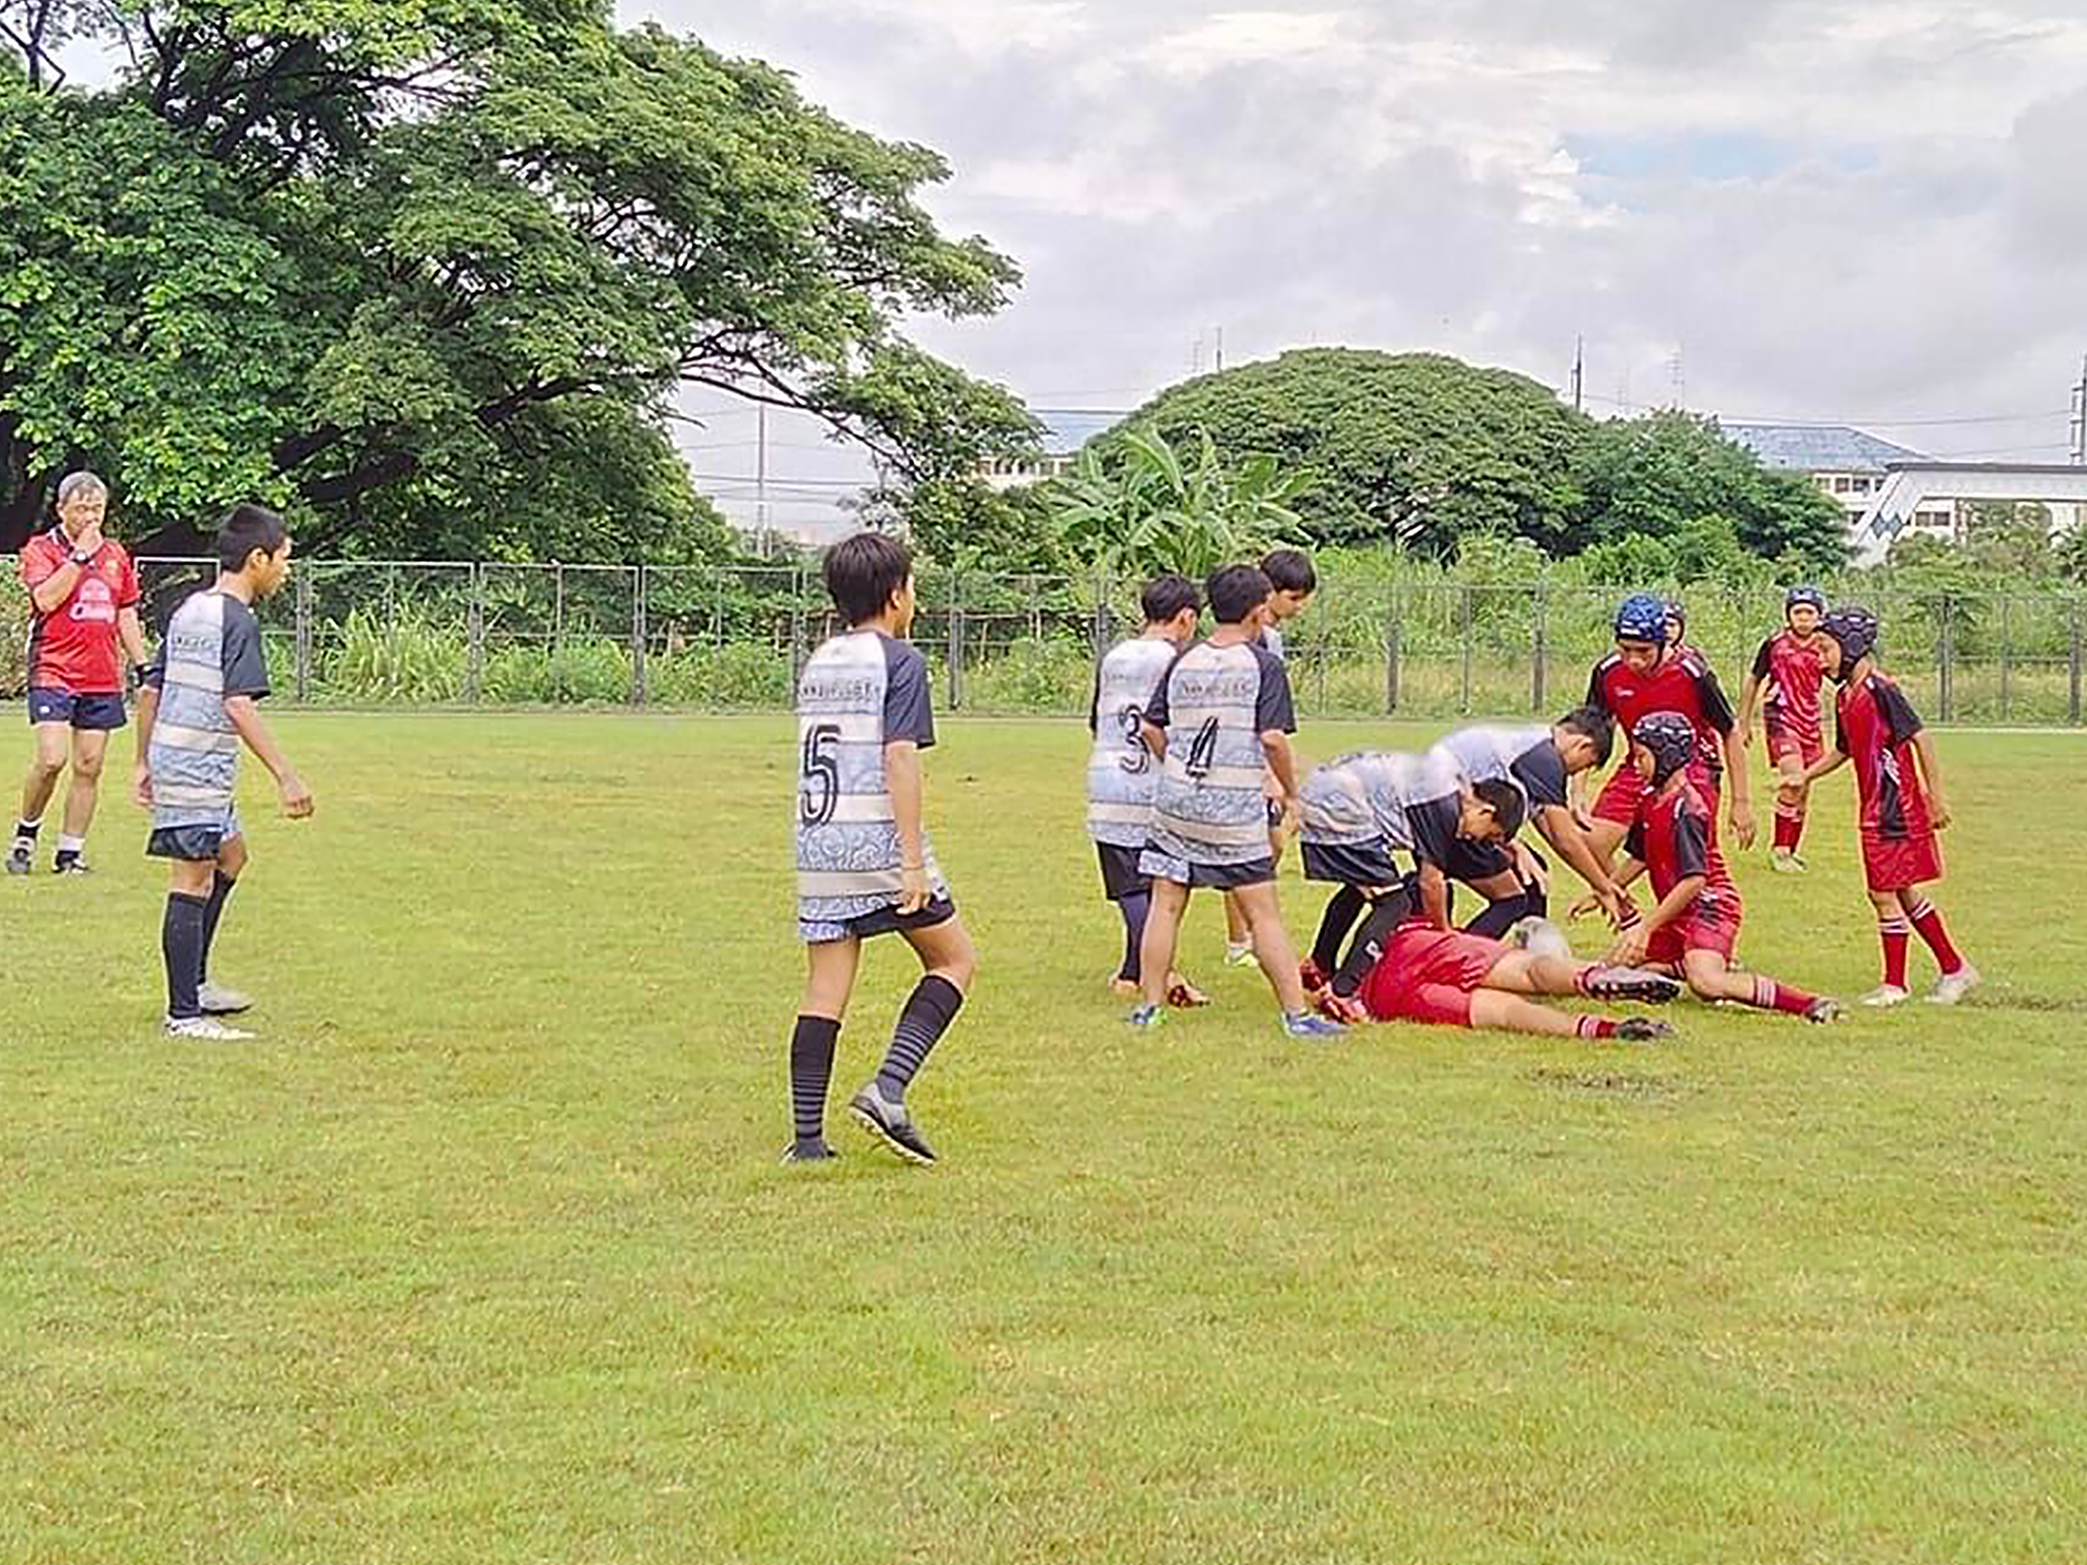 Visit from Doi Tao Rugby Club | Lanna Rugby Club